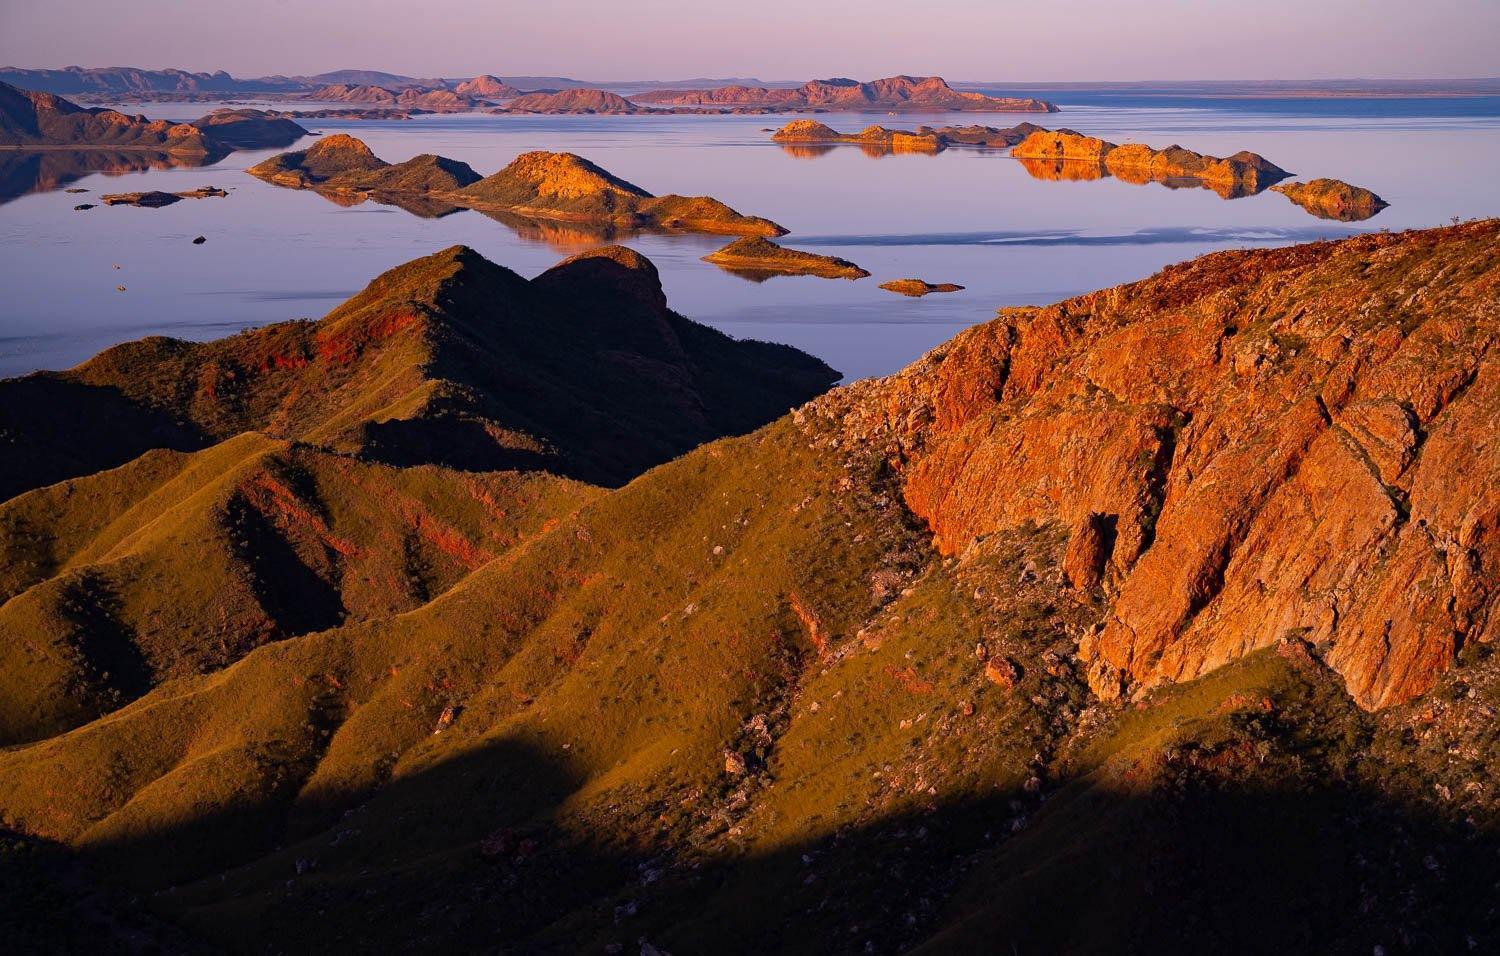 A giant couple of mountains with some greenery over them, and a lake in the background, Lake Argyle #4 - The Kimberley